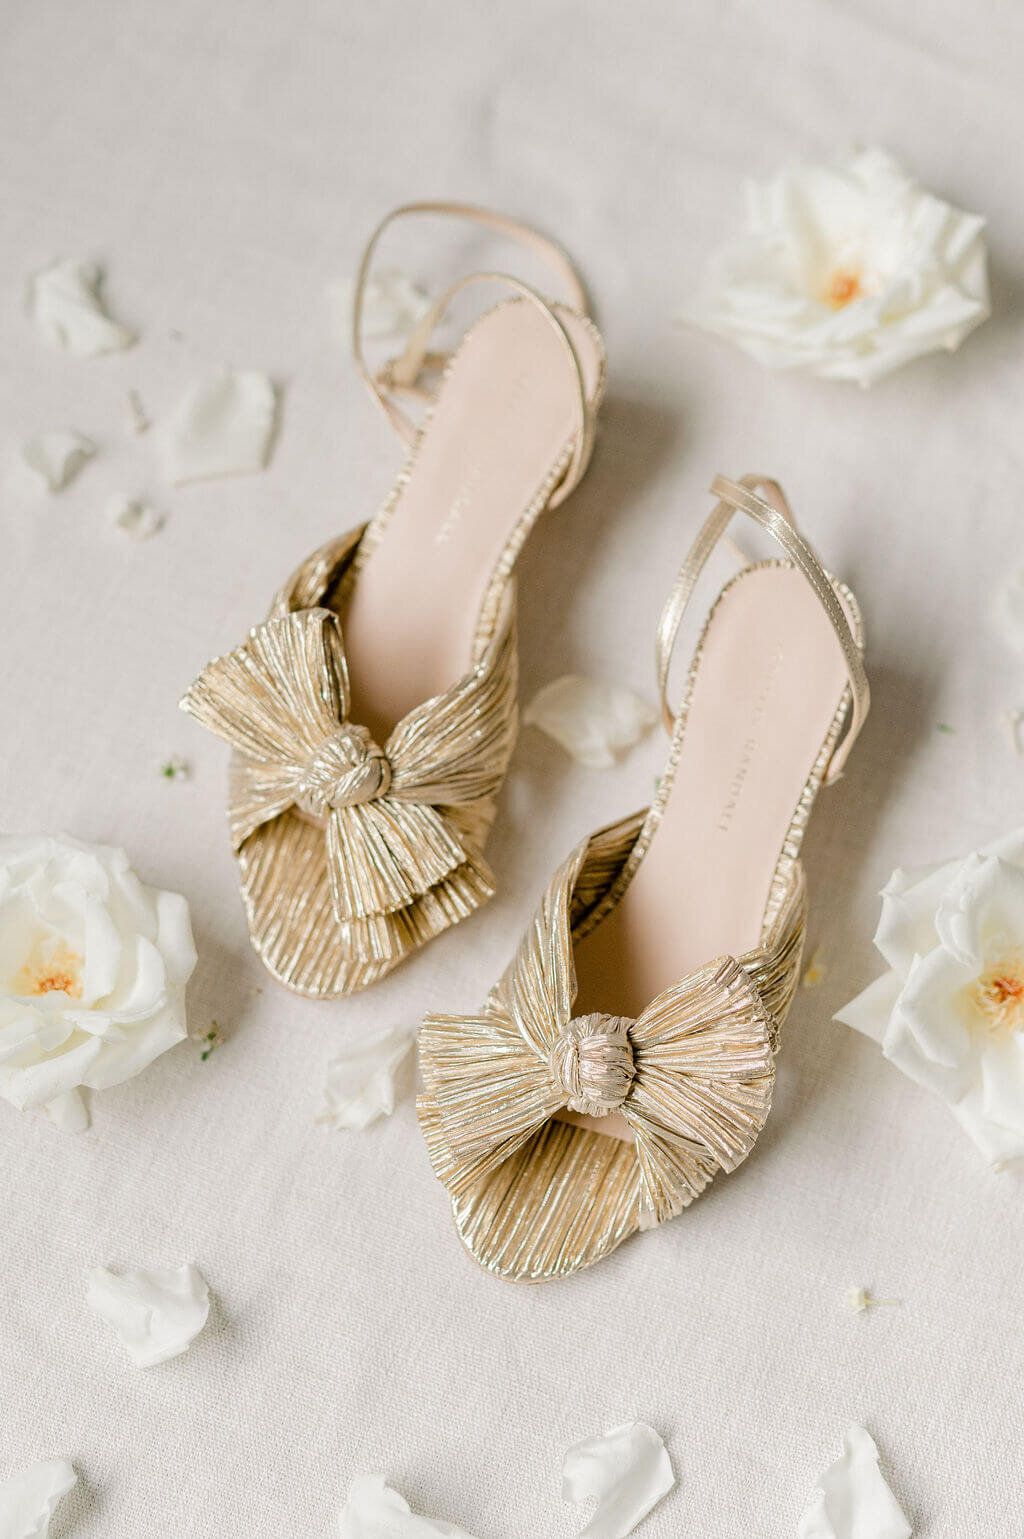 Golden Loeffler Randall bridal shoes surrounded by white roses.